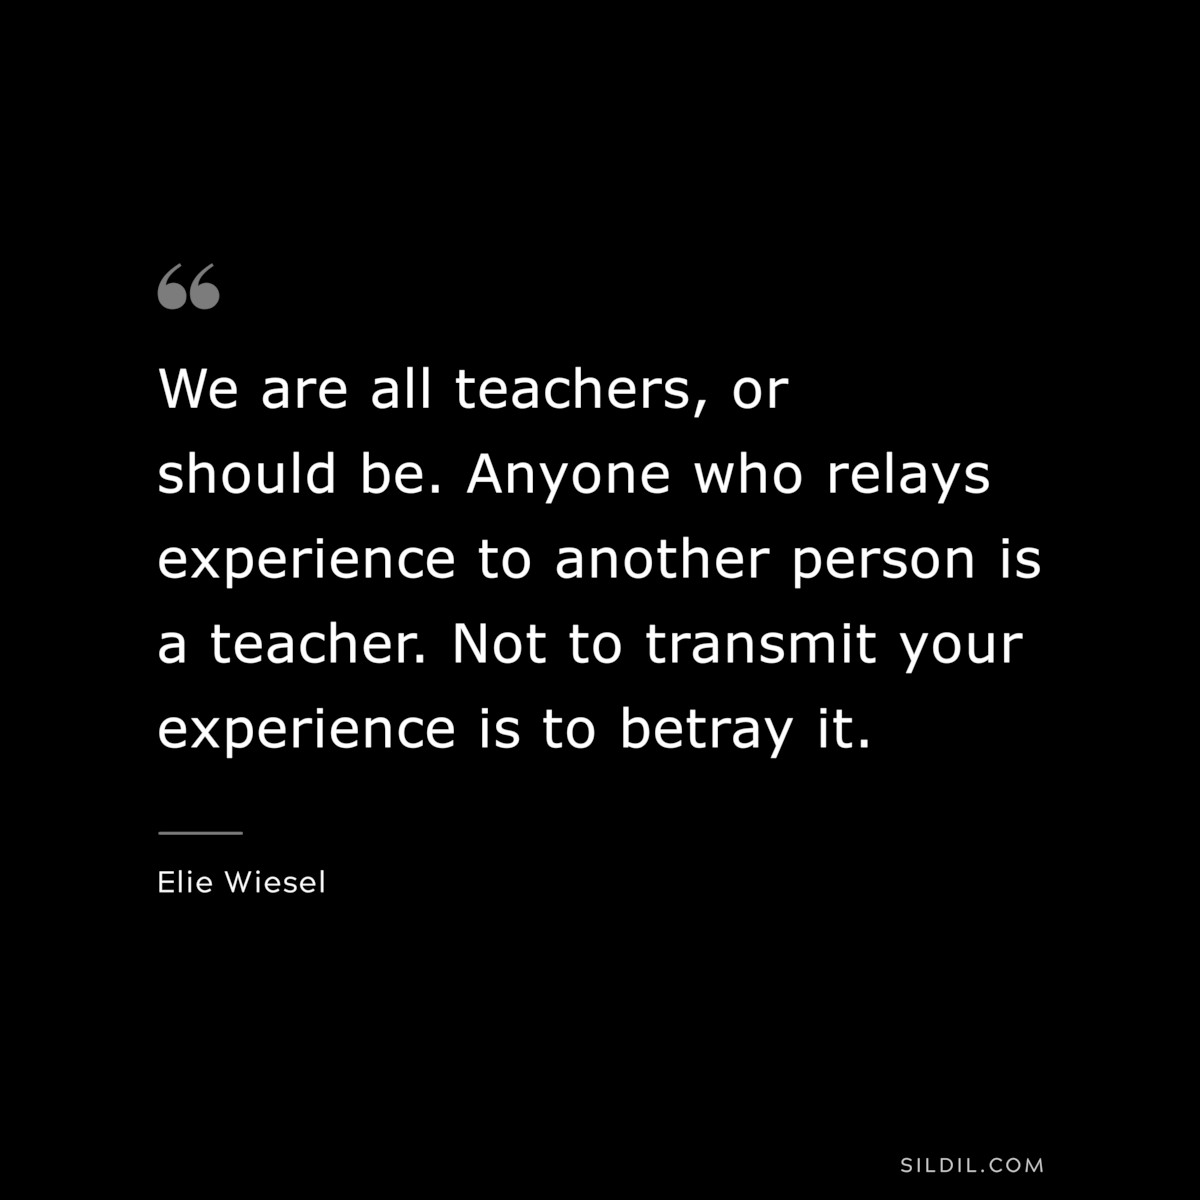 We are all teachers, or should be. Anyone who relays experience to another person is a teacher. Not to transmit your experience is to betray it. ― Elie Wiesel